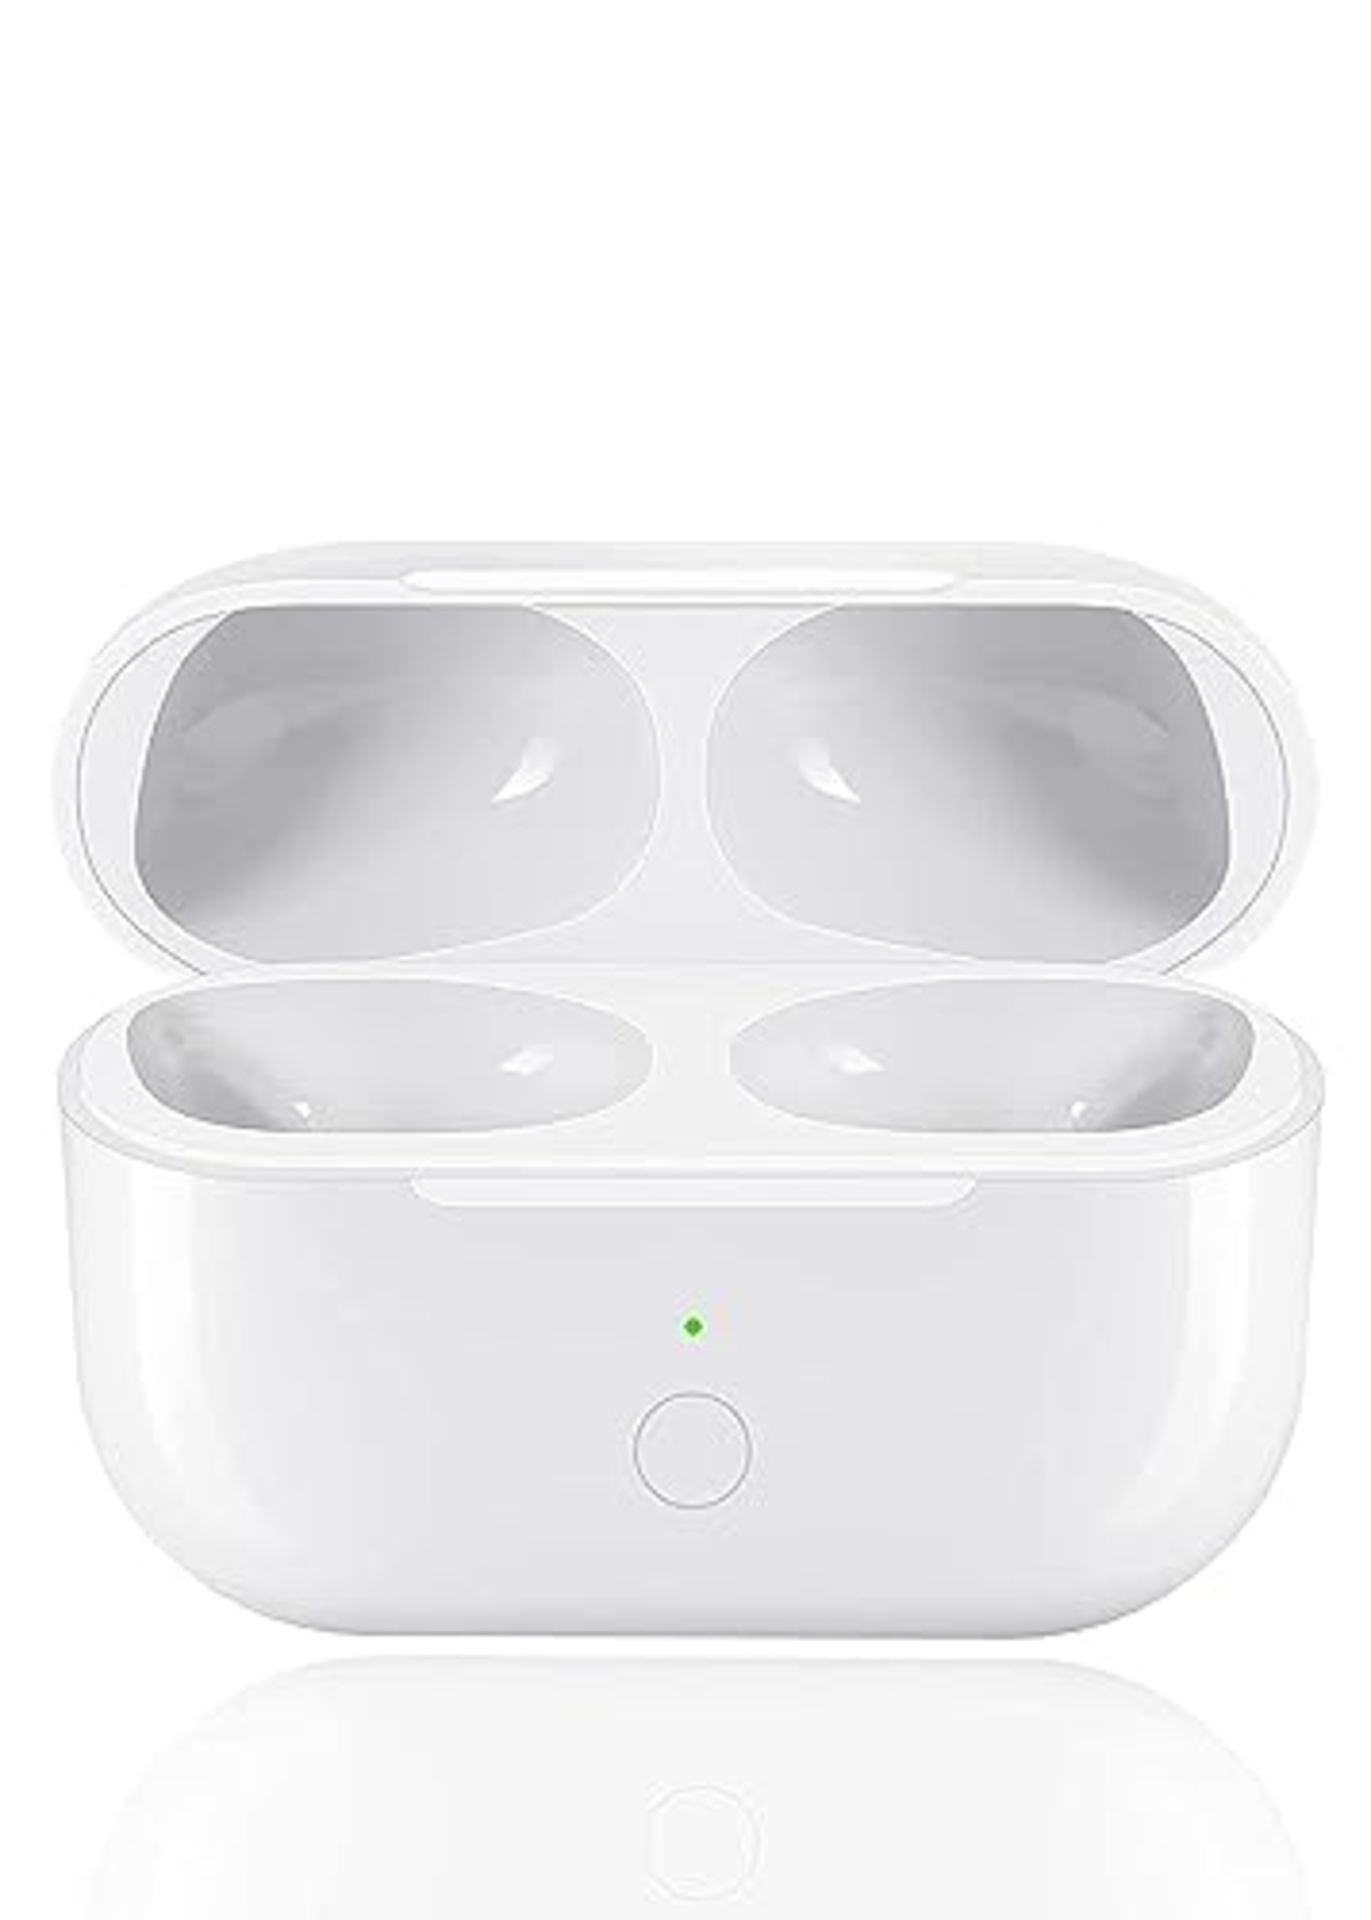 Wireless Charging Case for AirPods Pro 1 and AirPods Pro 2, Replacement Charging Case